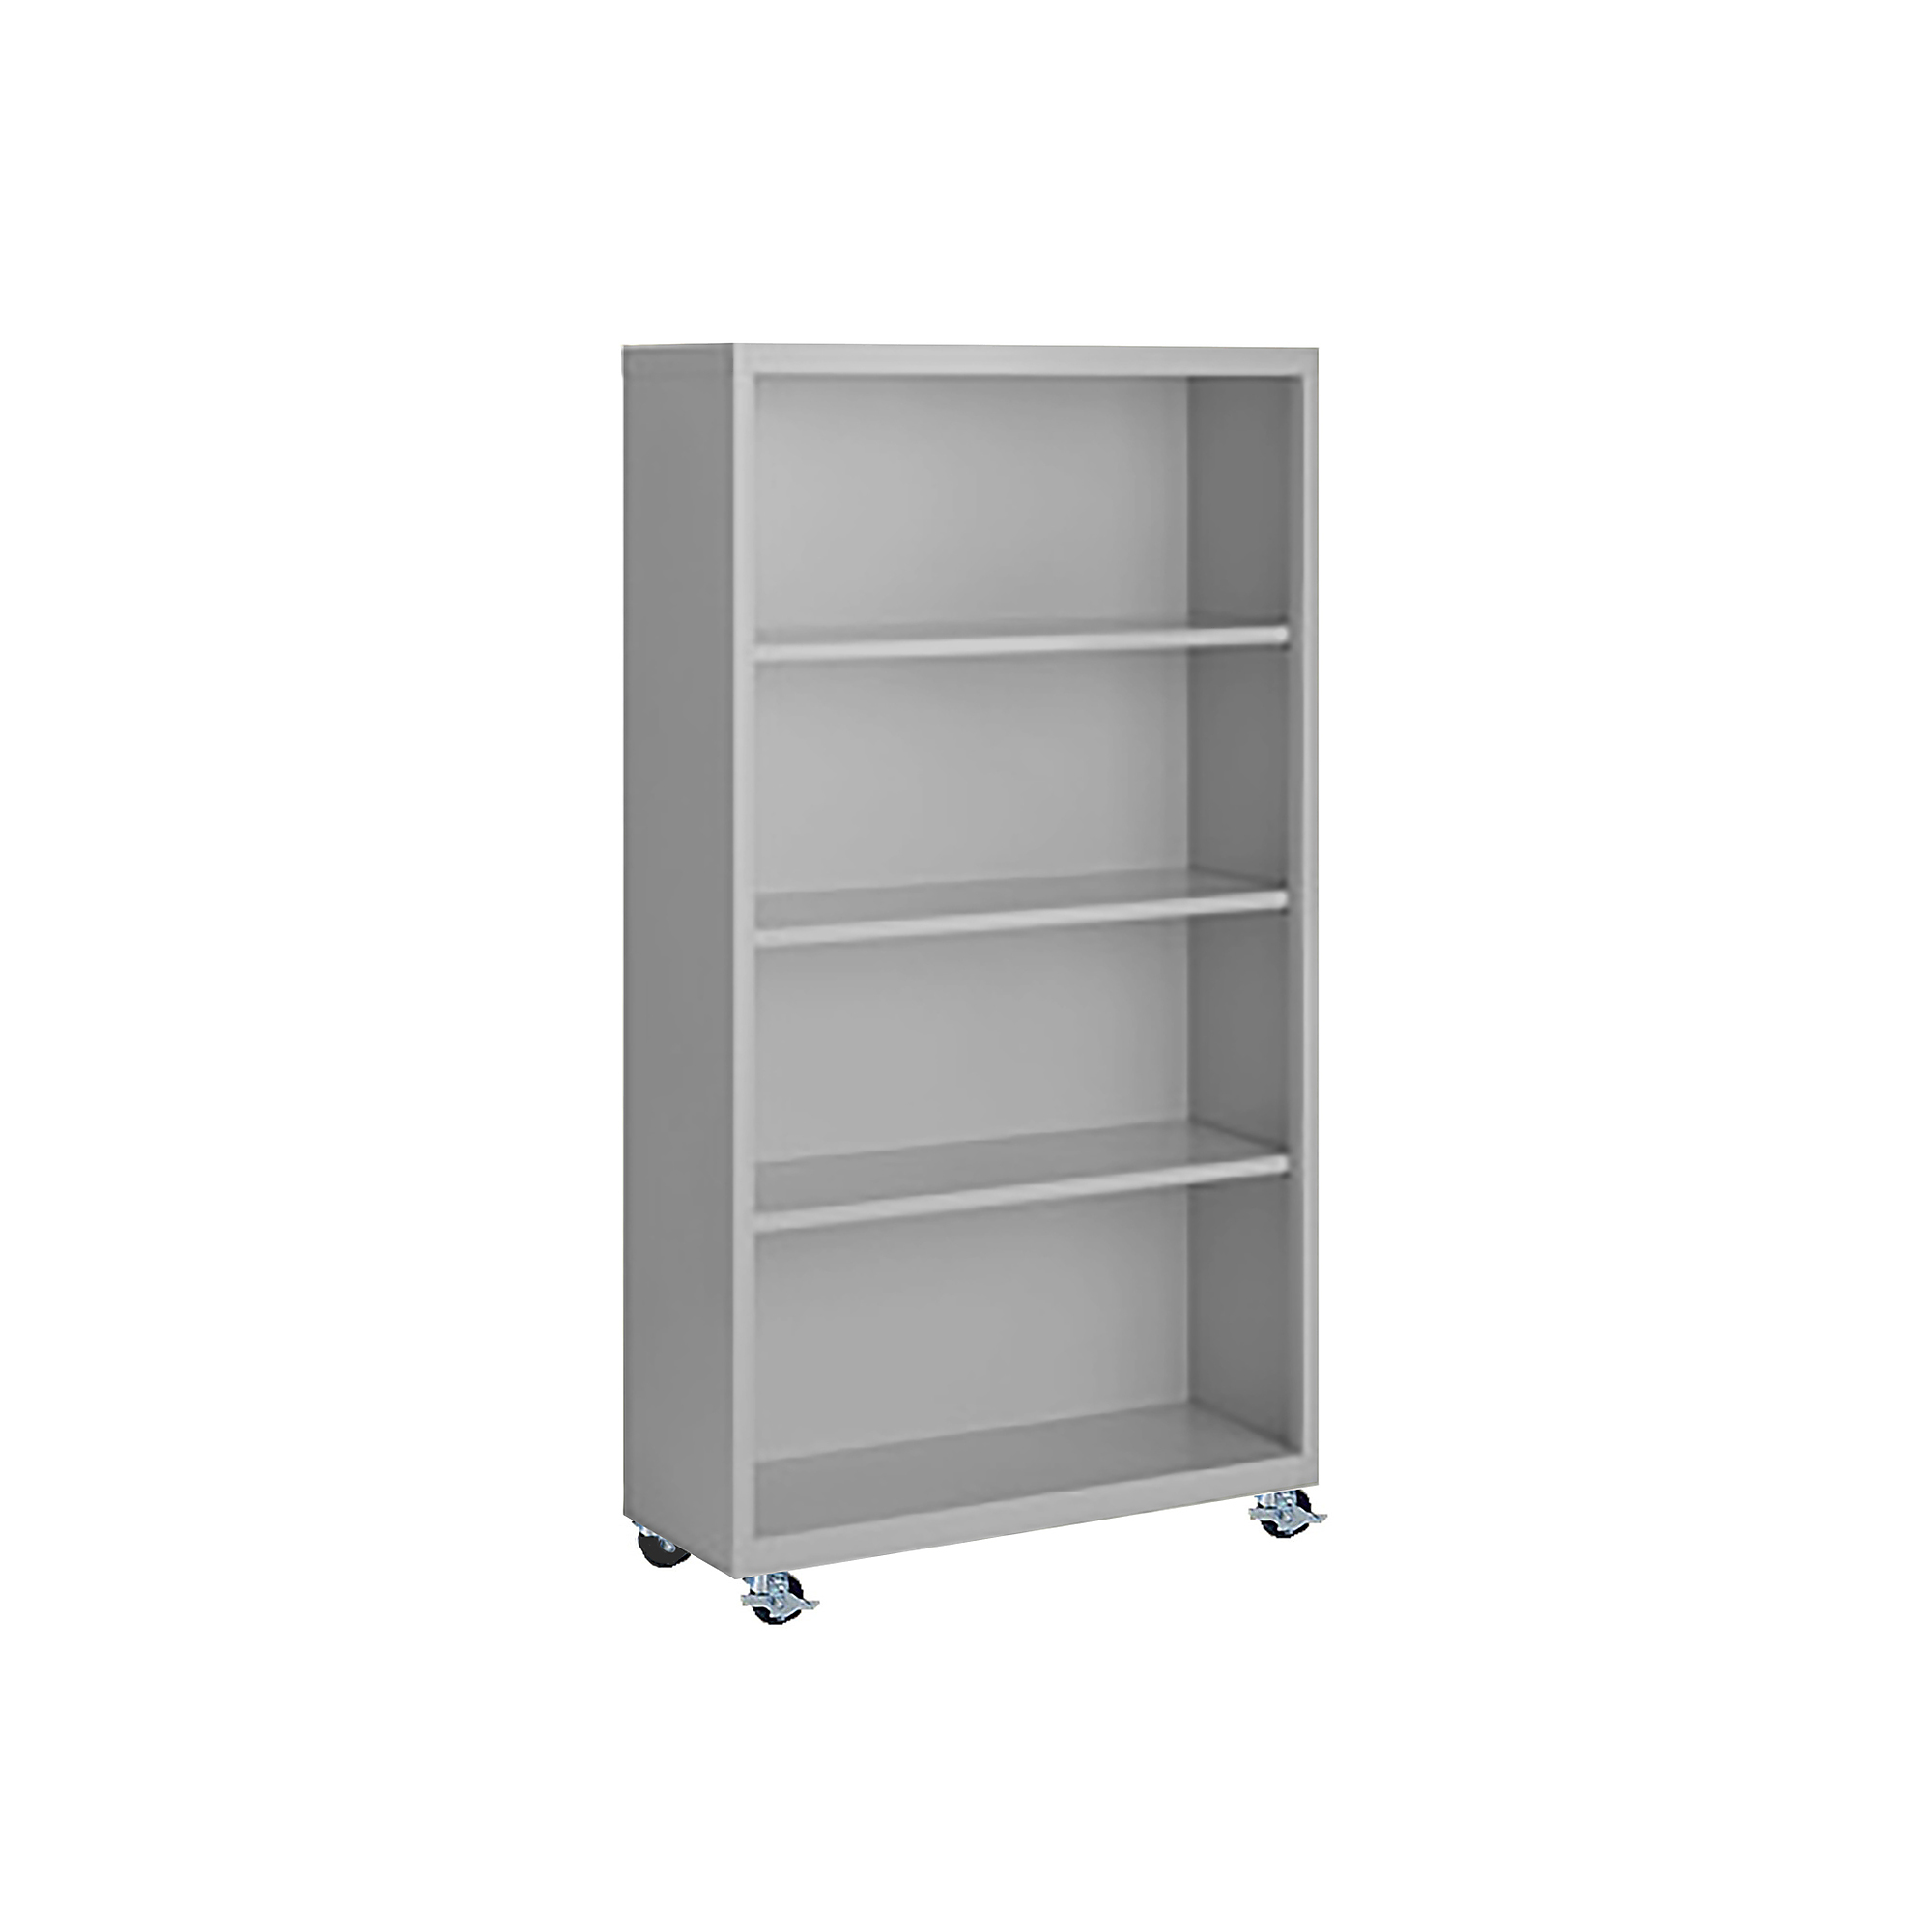 Steel Cabinets USA, 36Inchx18Inchx33Inch Gray Mobile Bookcase Fully Assembled, Height 63 in, Shelves (qty.) 4, Material Steel, Model MBCA-366318-G